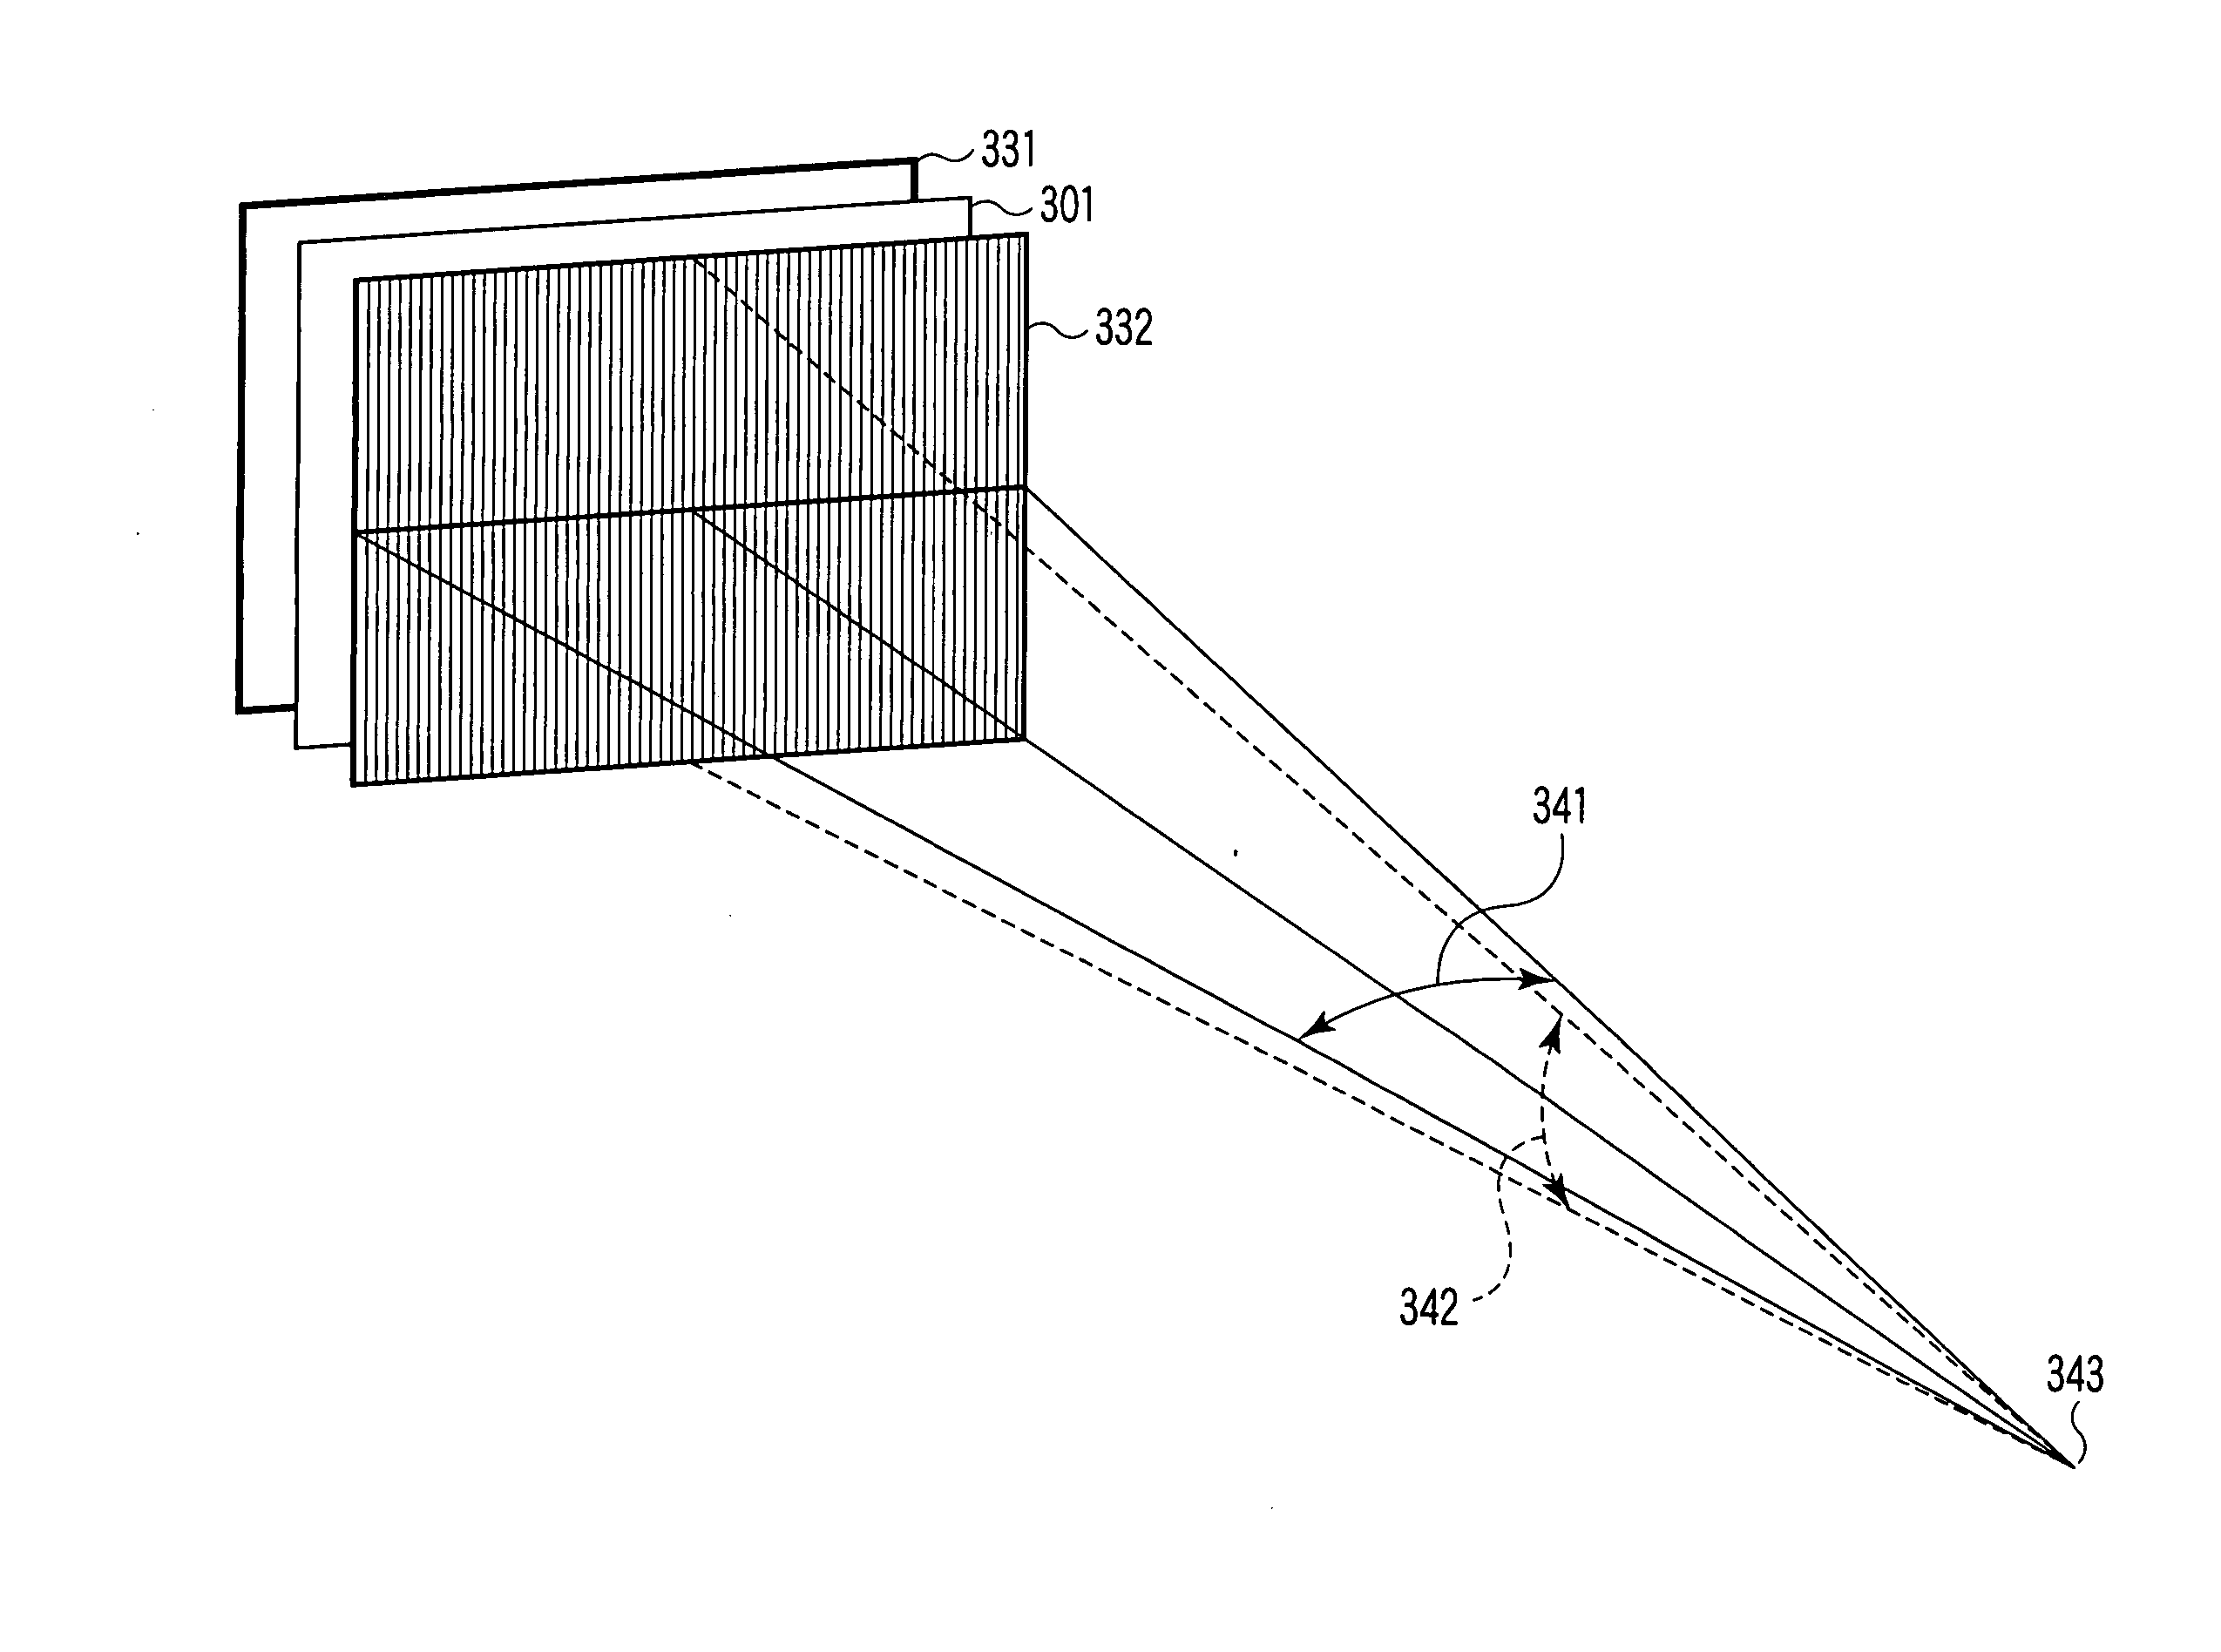 Structure of three-dimensional image data, method of recording three-dimensional image data, and method of displaying and reproducing three-dimensional image data